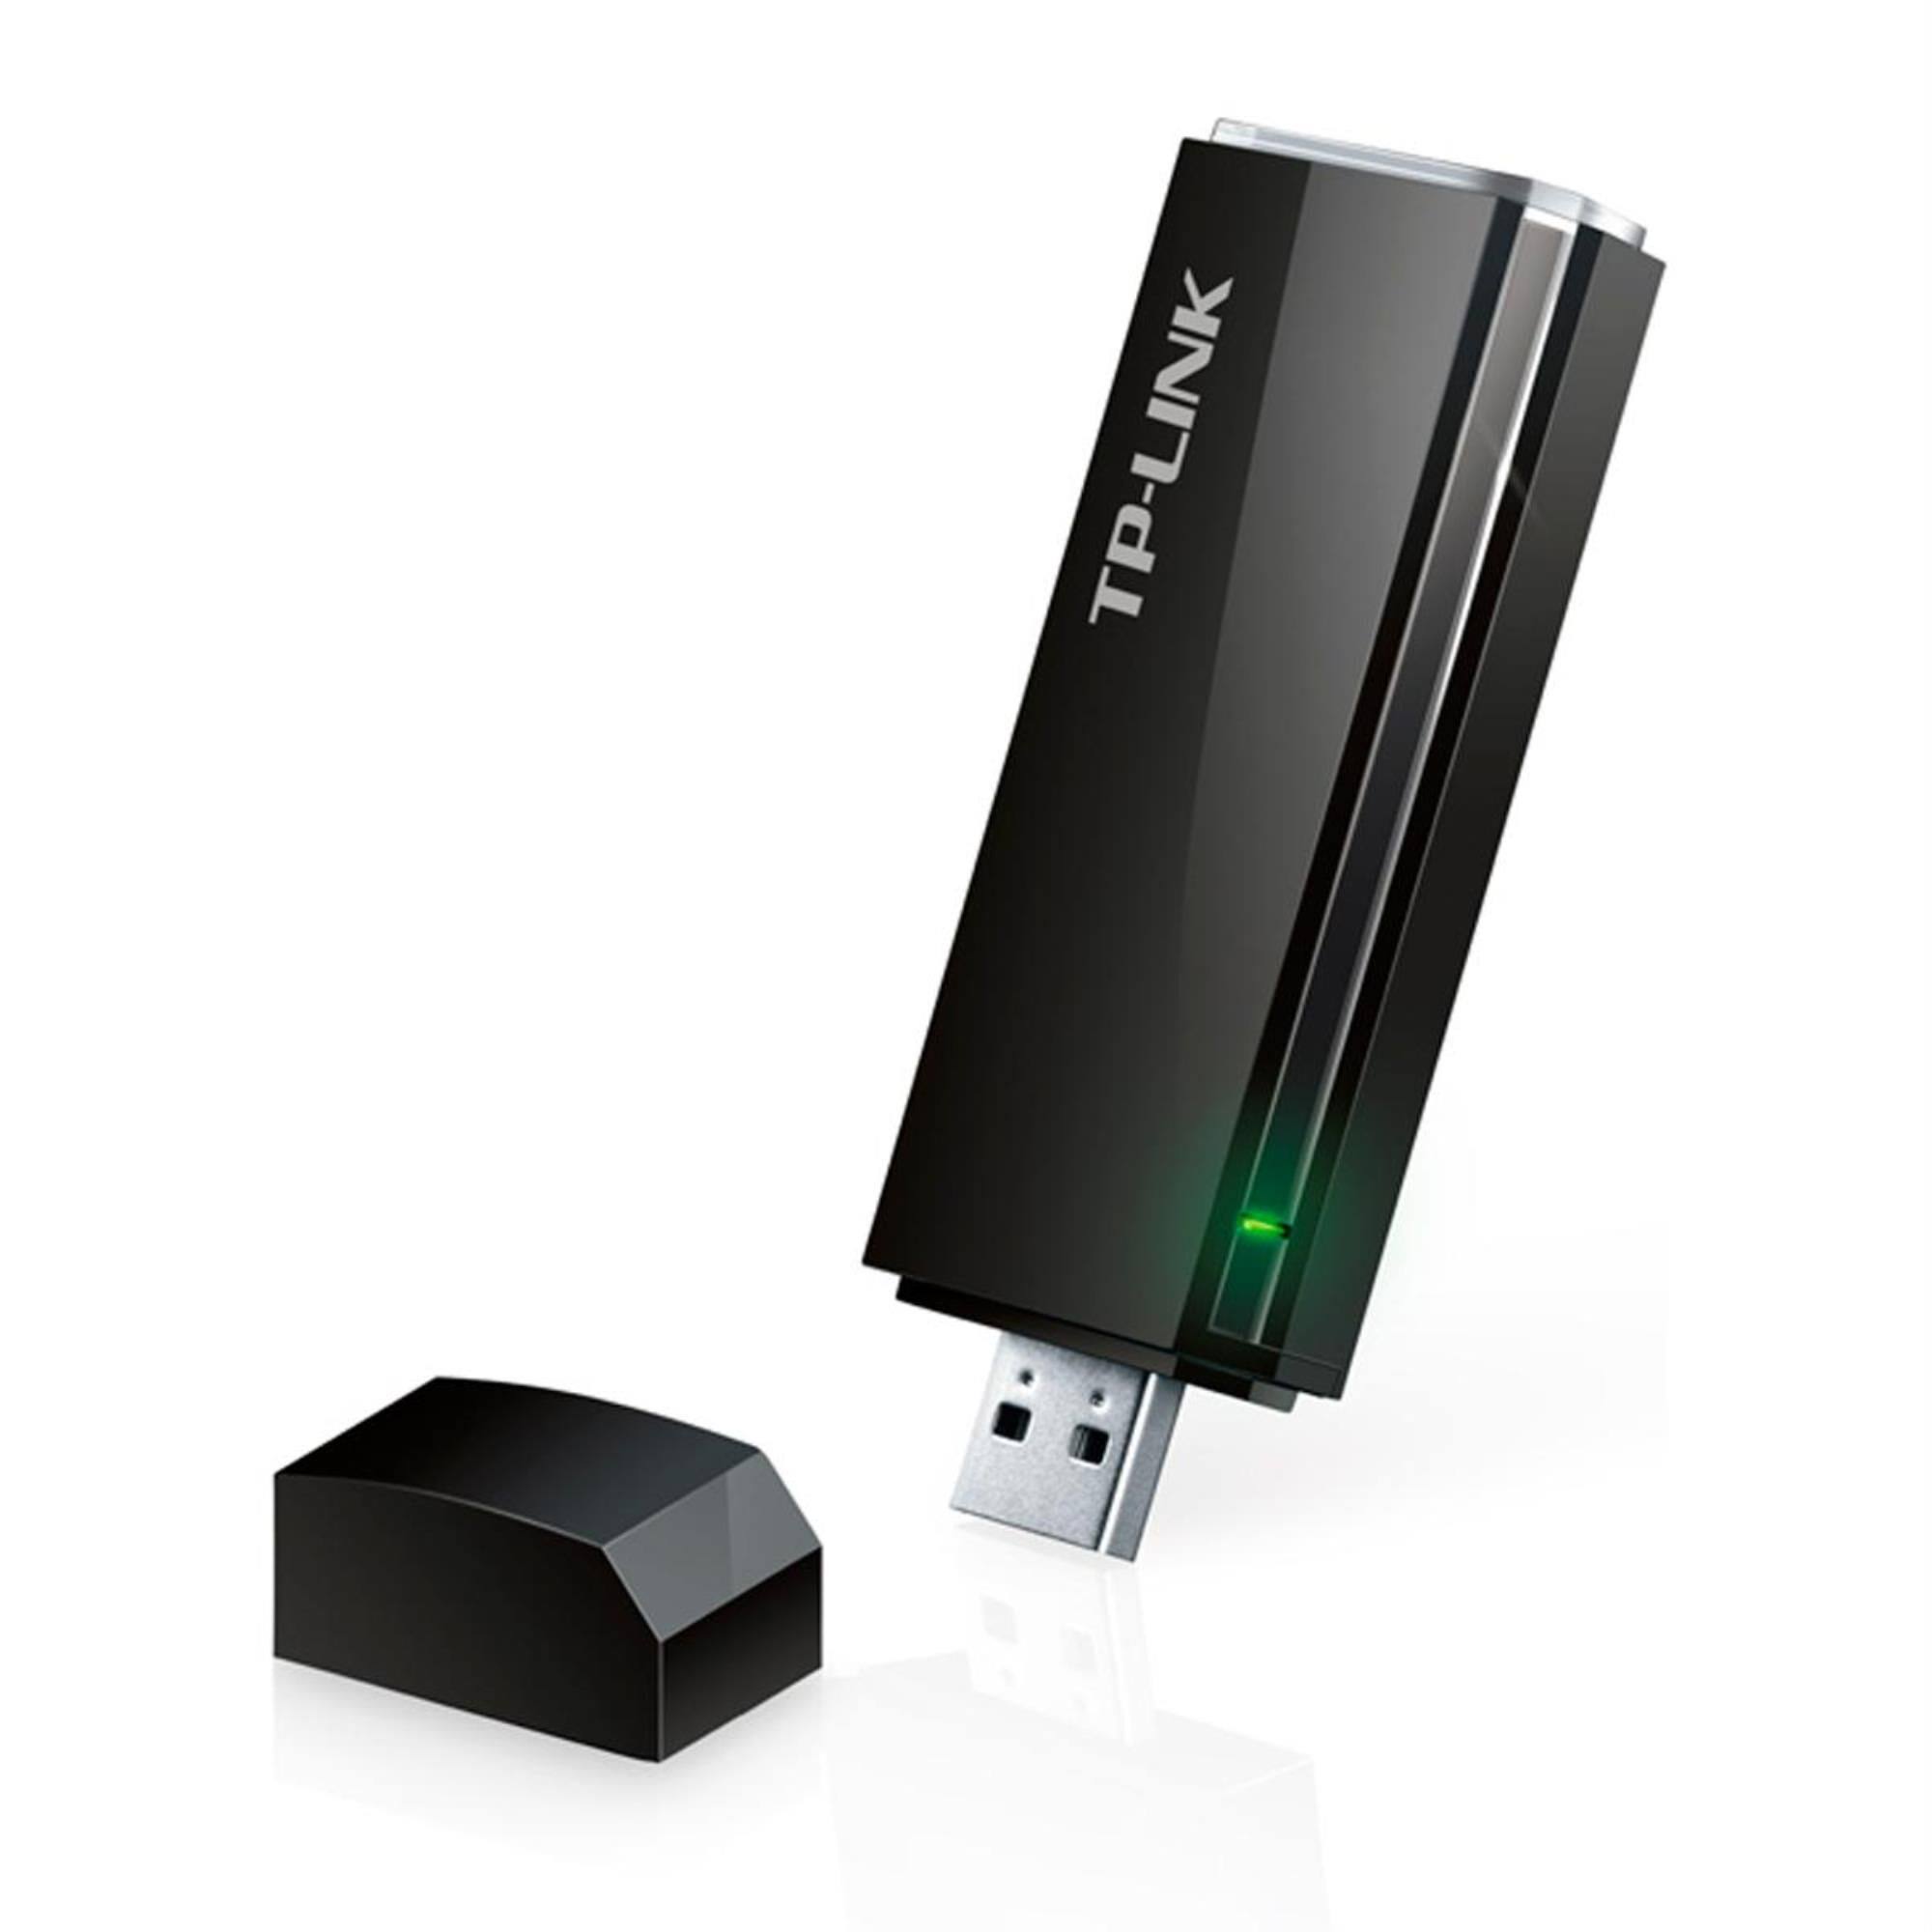 TP-Link - Dual-Band AC USB Network Adapter - Black